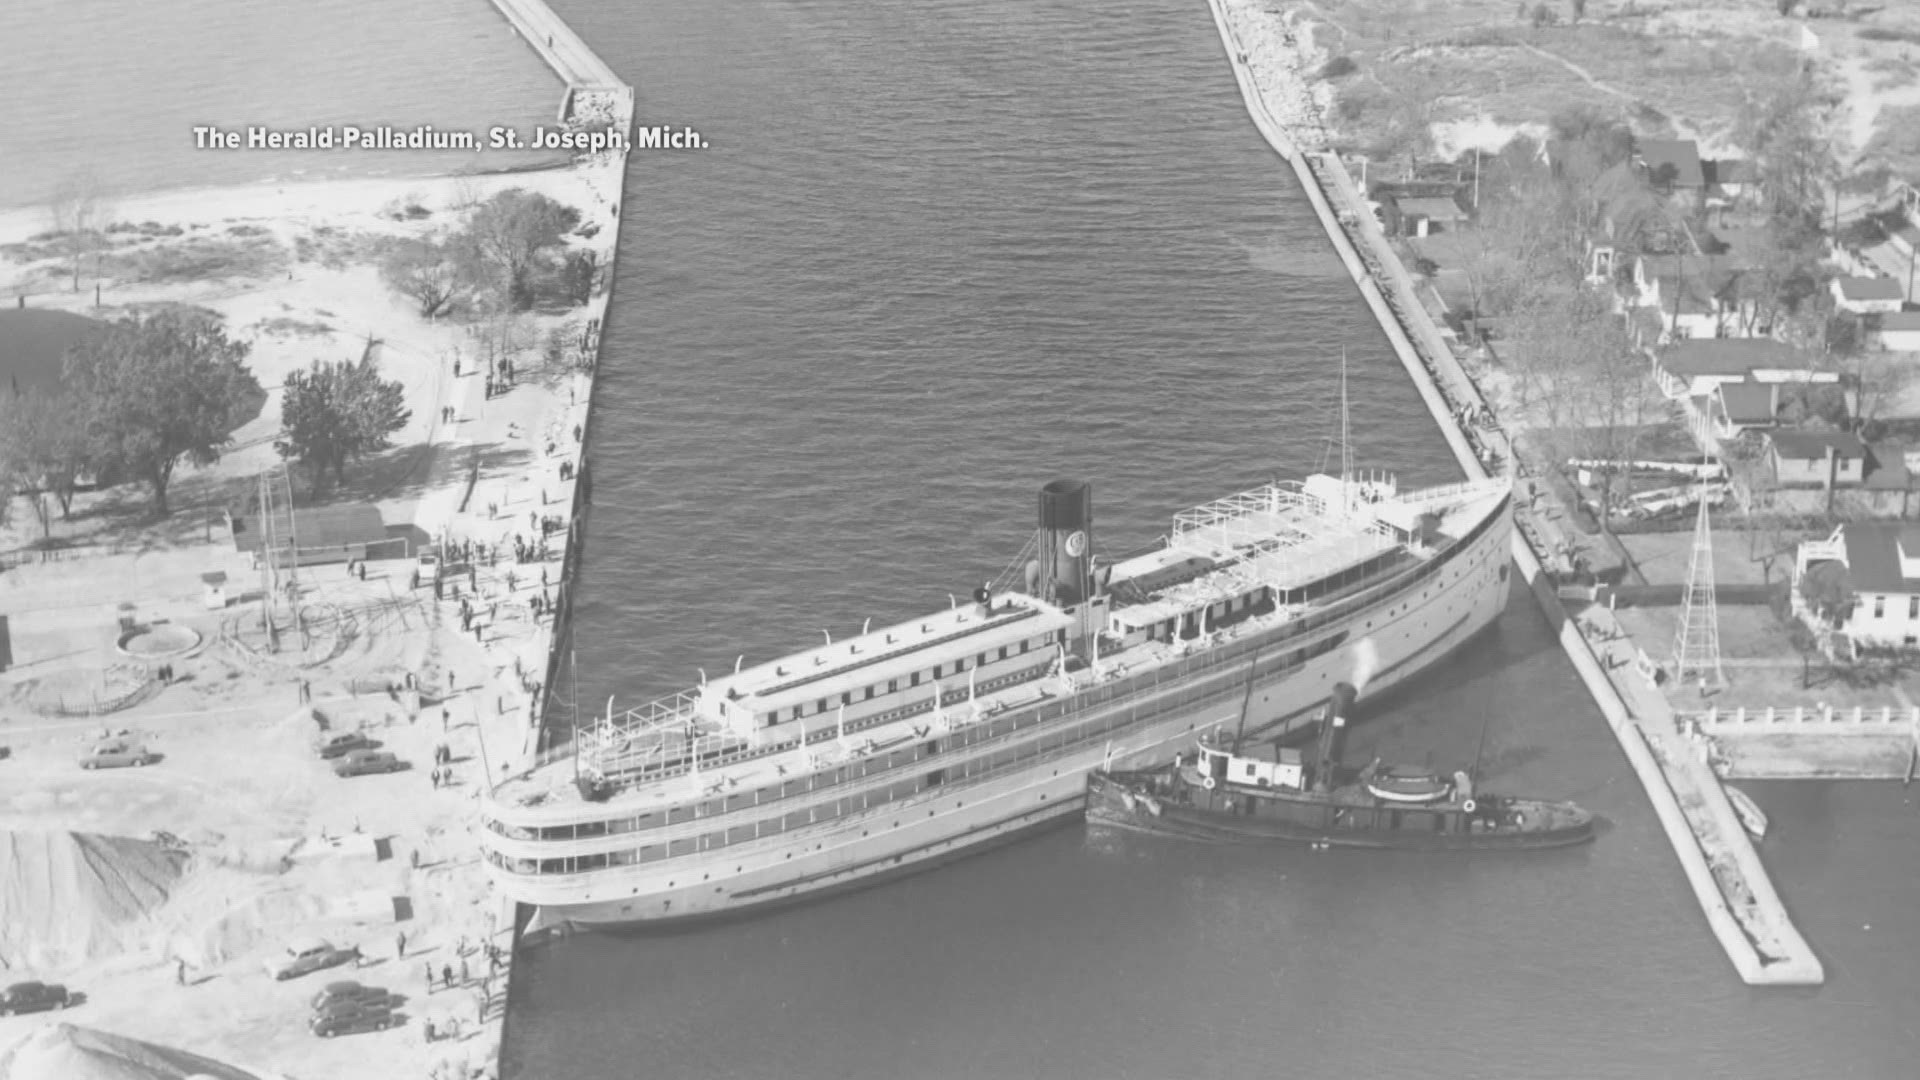 The S.S. City of Grand Rapids steamship mirrored the incident in the Suez Canal over 50 years ago.